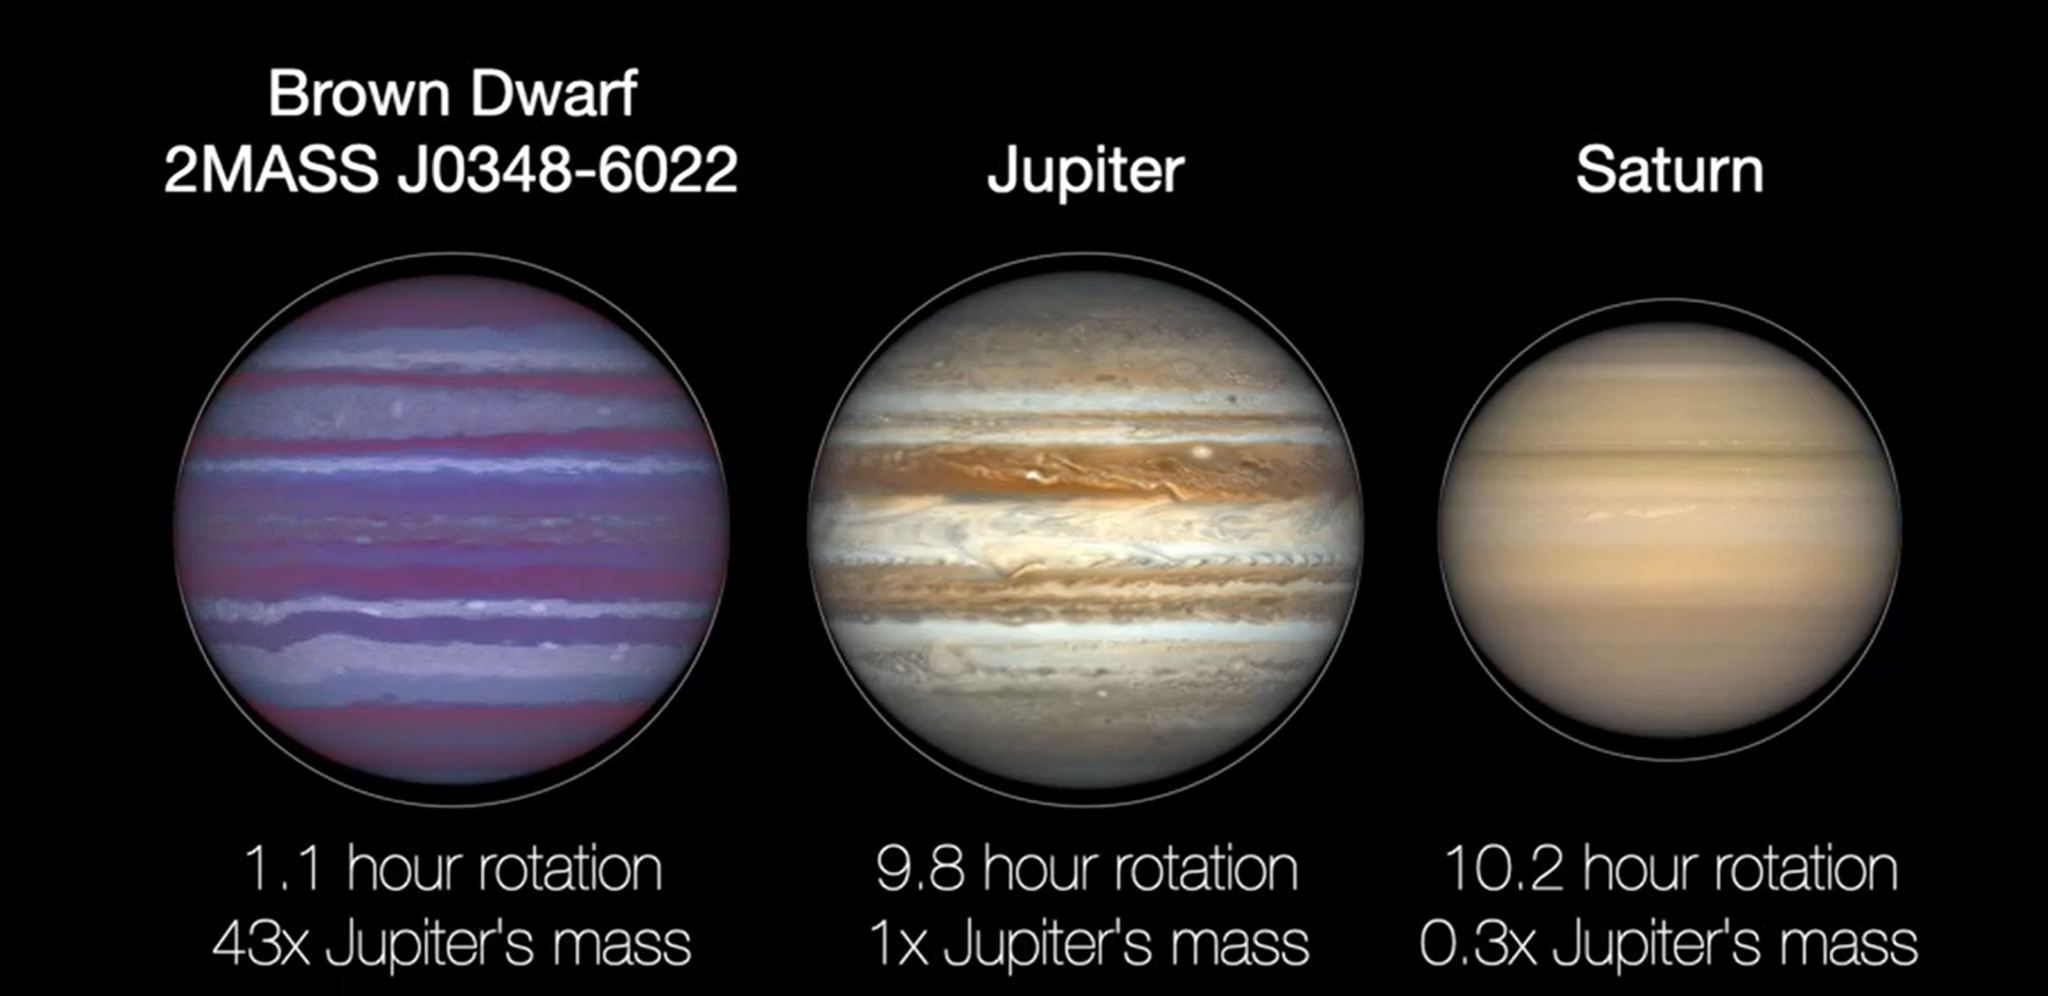 From left to right: illustration of a brown dwarf, Jupiter, and Saturn